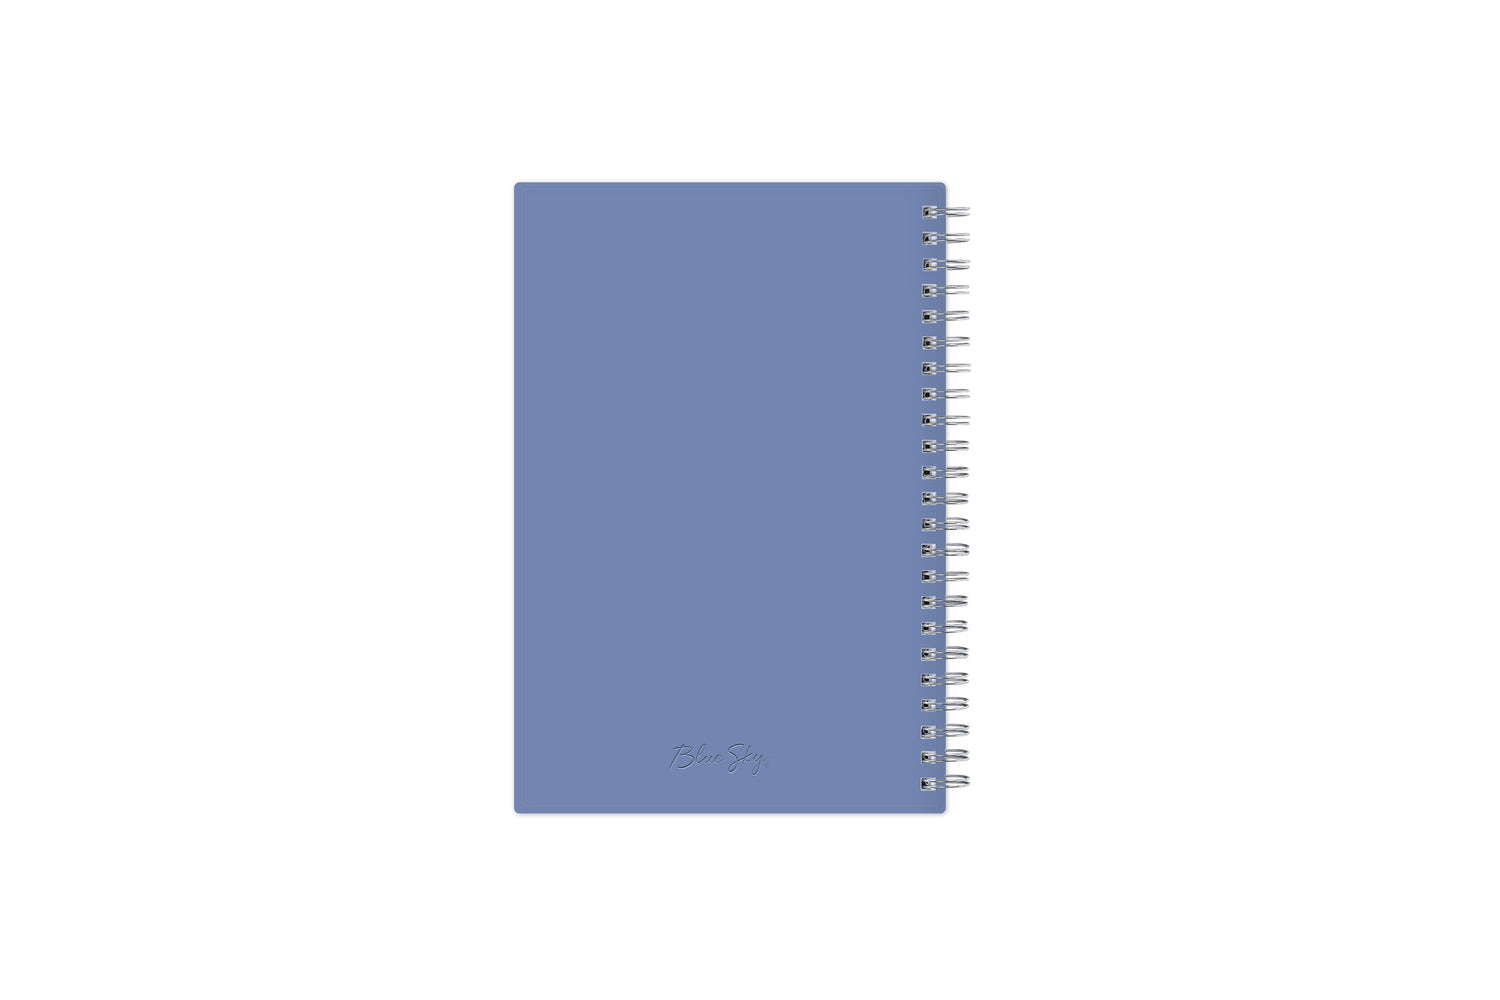 January 2024 to December 2024 weekly planner featuring a solid flexible light purple back cover, silver twin wire-o, and a compact 5x8 size planner